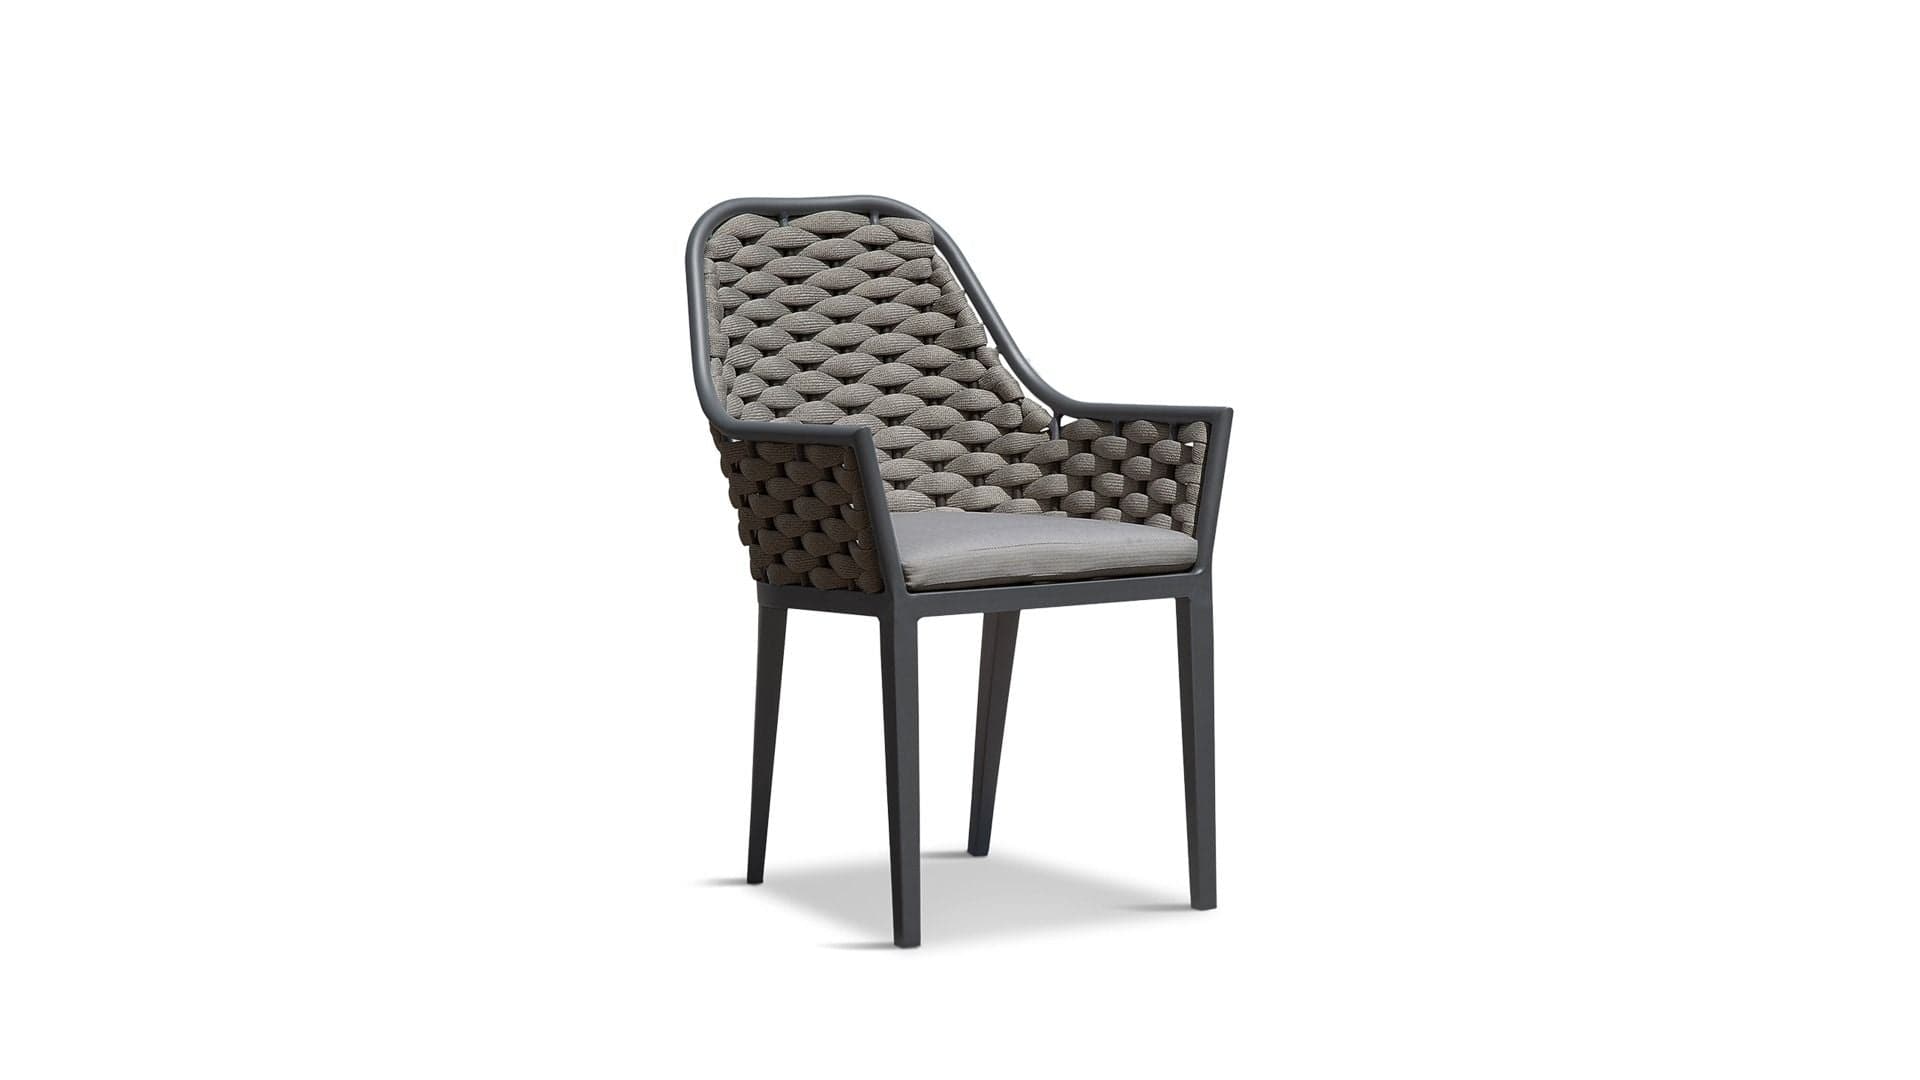 Harmonia Living Outdoor Dining Chairs Harmonia Living - Parlor Dining Chair